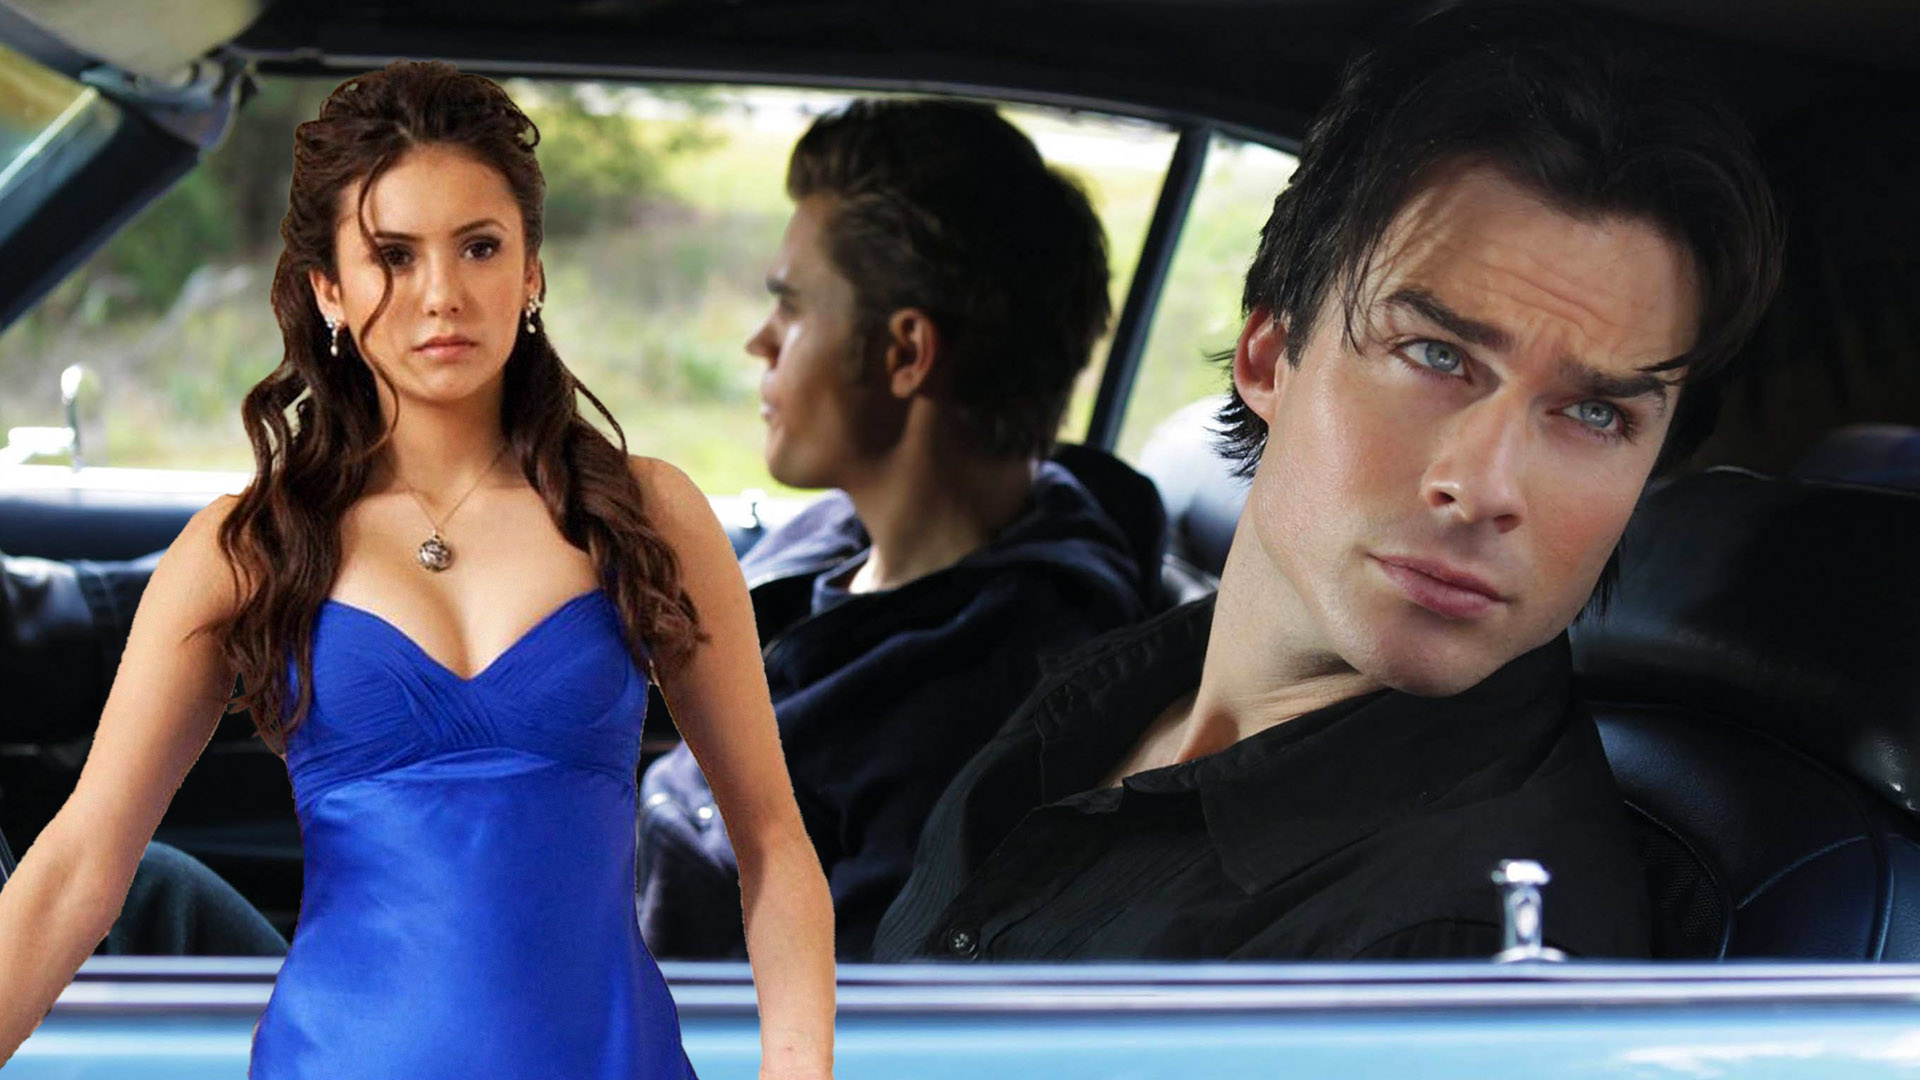 Who Was the Major Character The Vampire Diaries' Creator Feared to Kill Off?